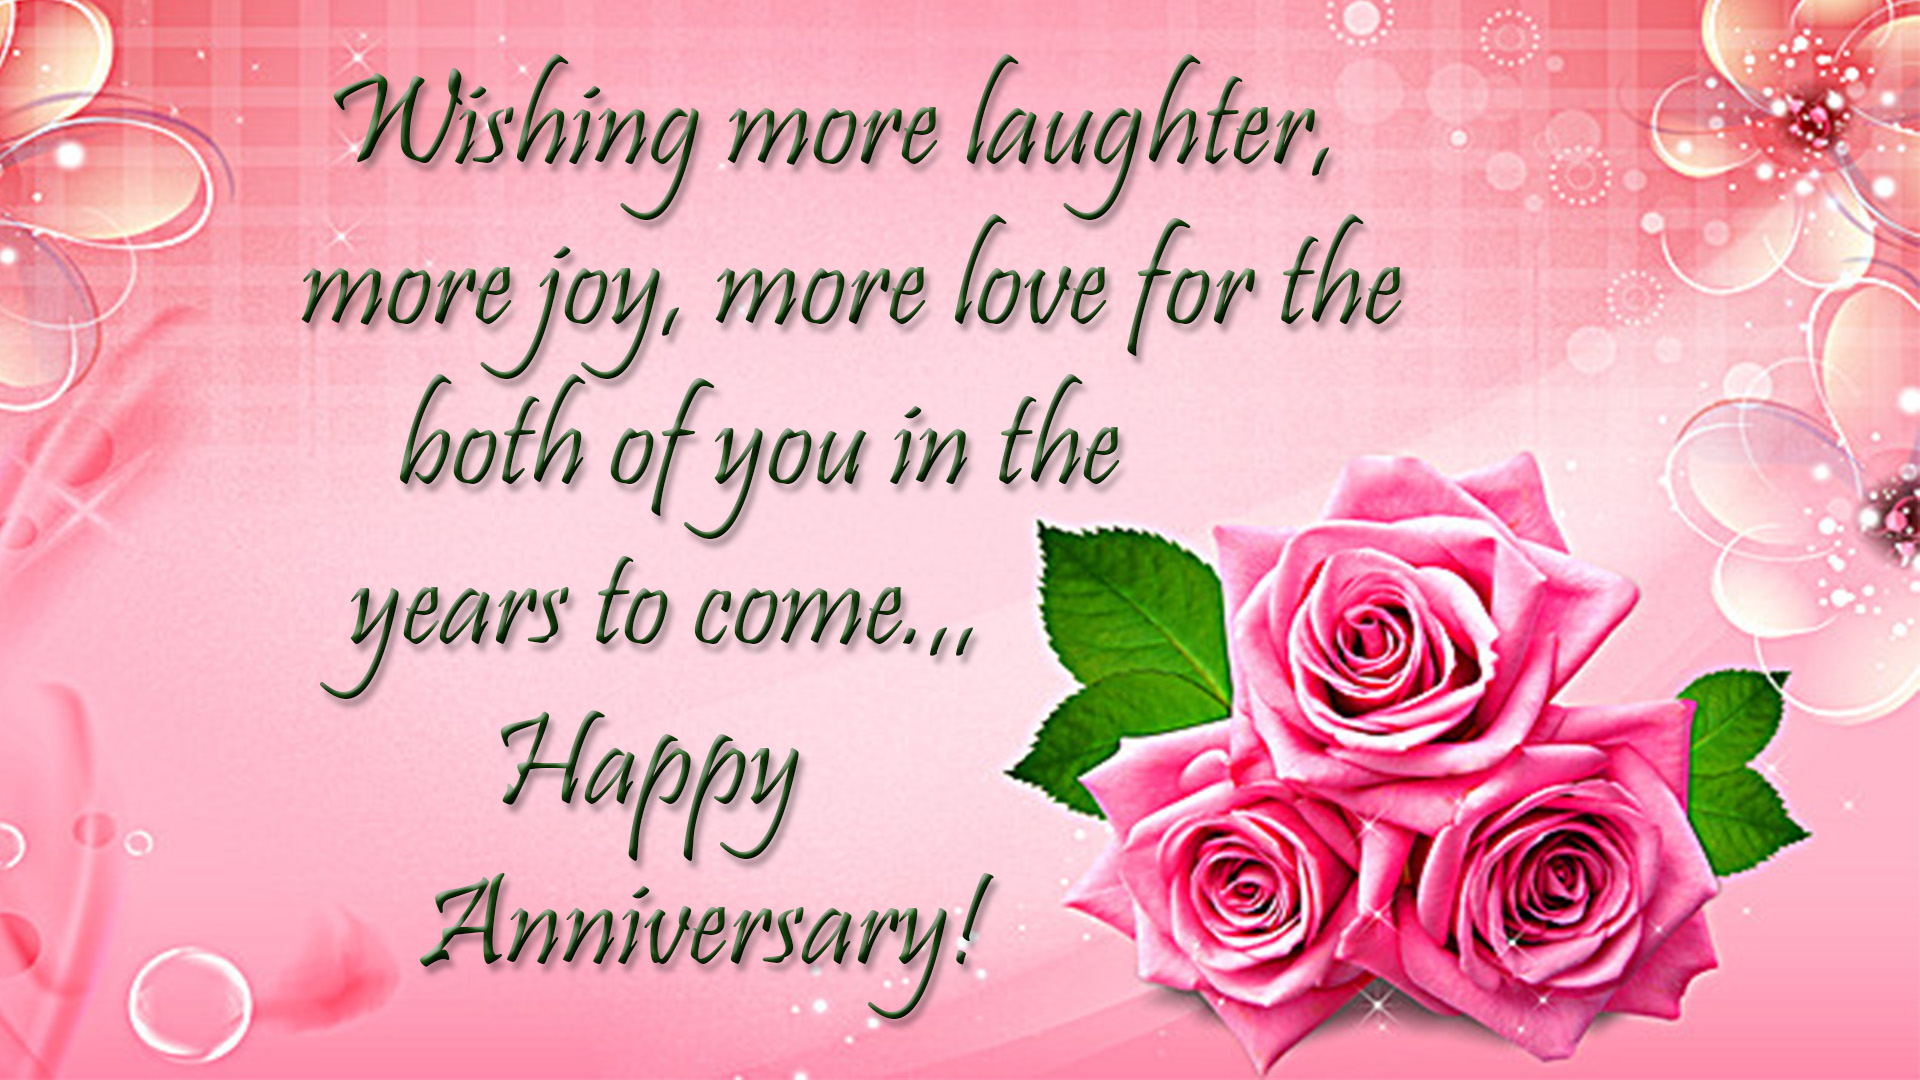 Anniversary Wish and Quotations'